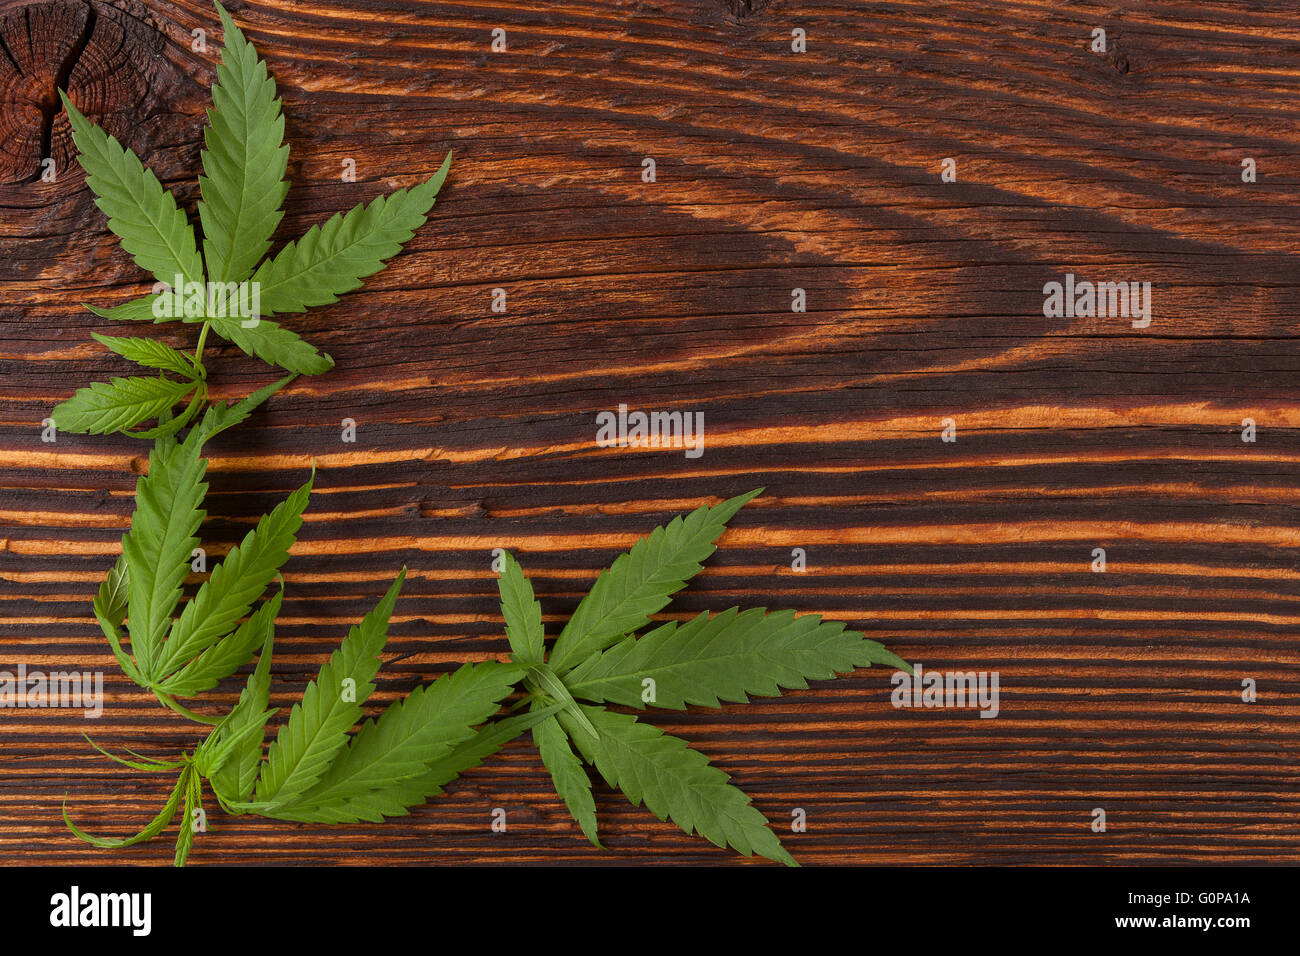 Cannabis buds and foliage on brown wooden table, top view. Medical marijuana, alternative medicine. Stock Photo